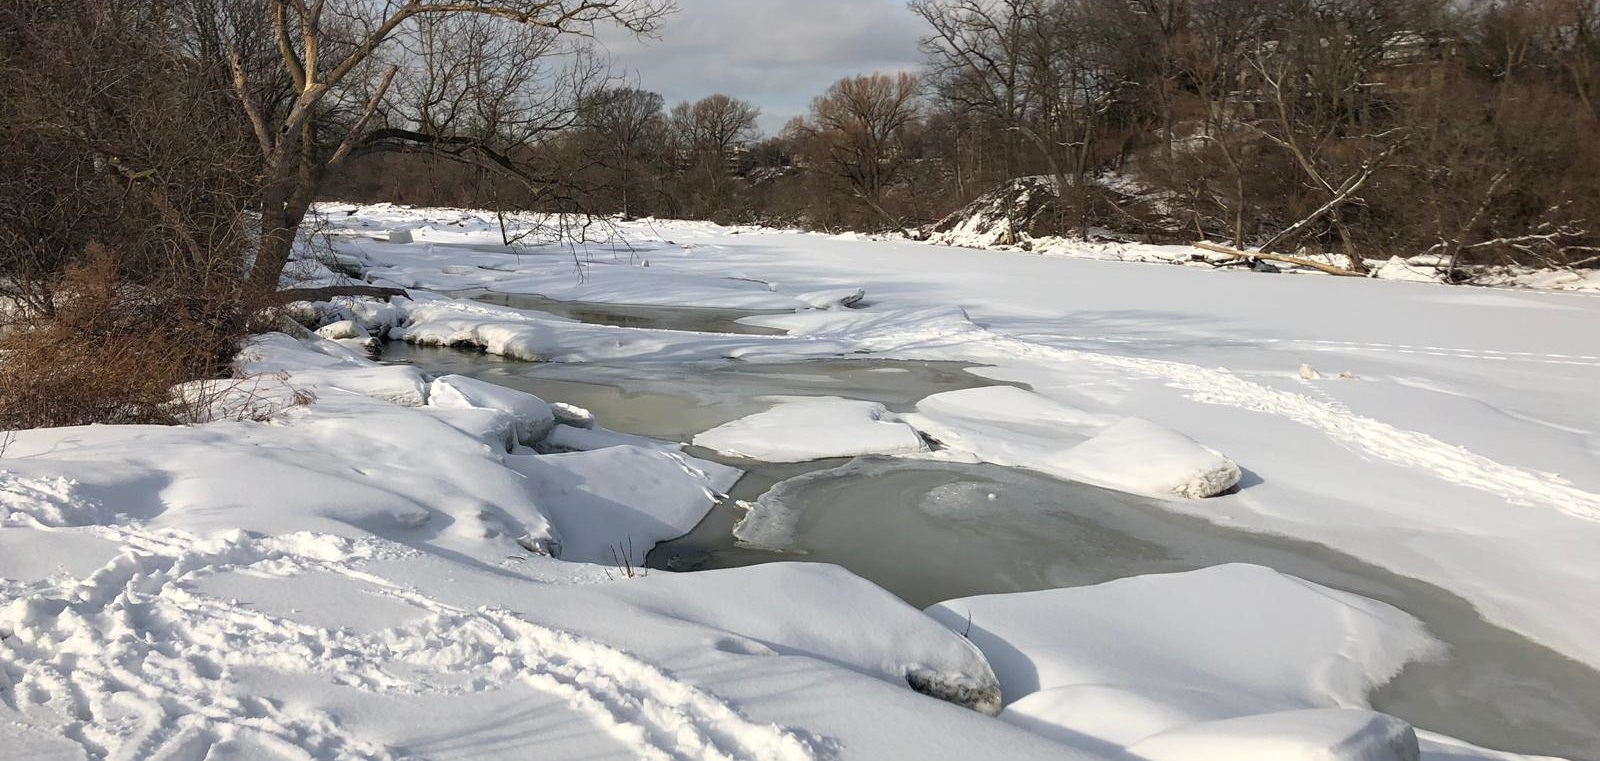 ice jam on Humber River near Old Mill poses spring safety hazard